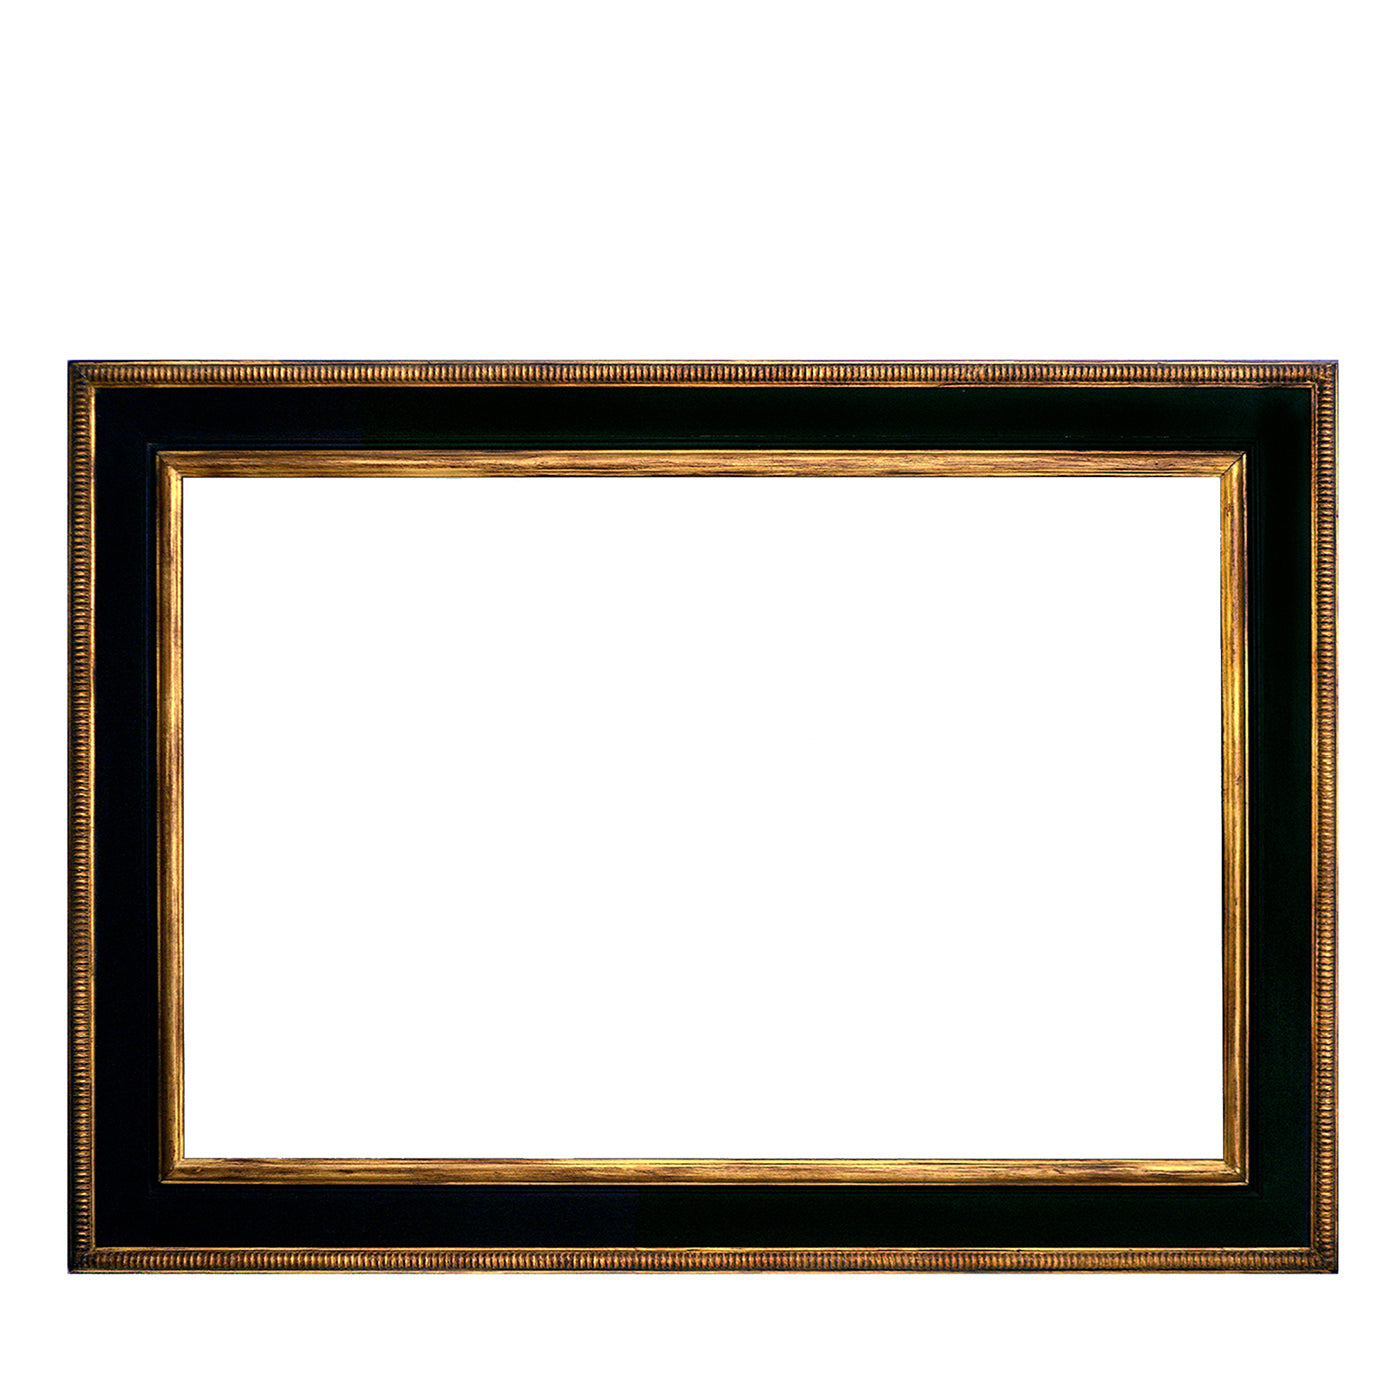 Cassetta Gold Leaf Gilded Ebony Lacquered Wooden Frame  - Main view